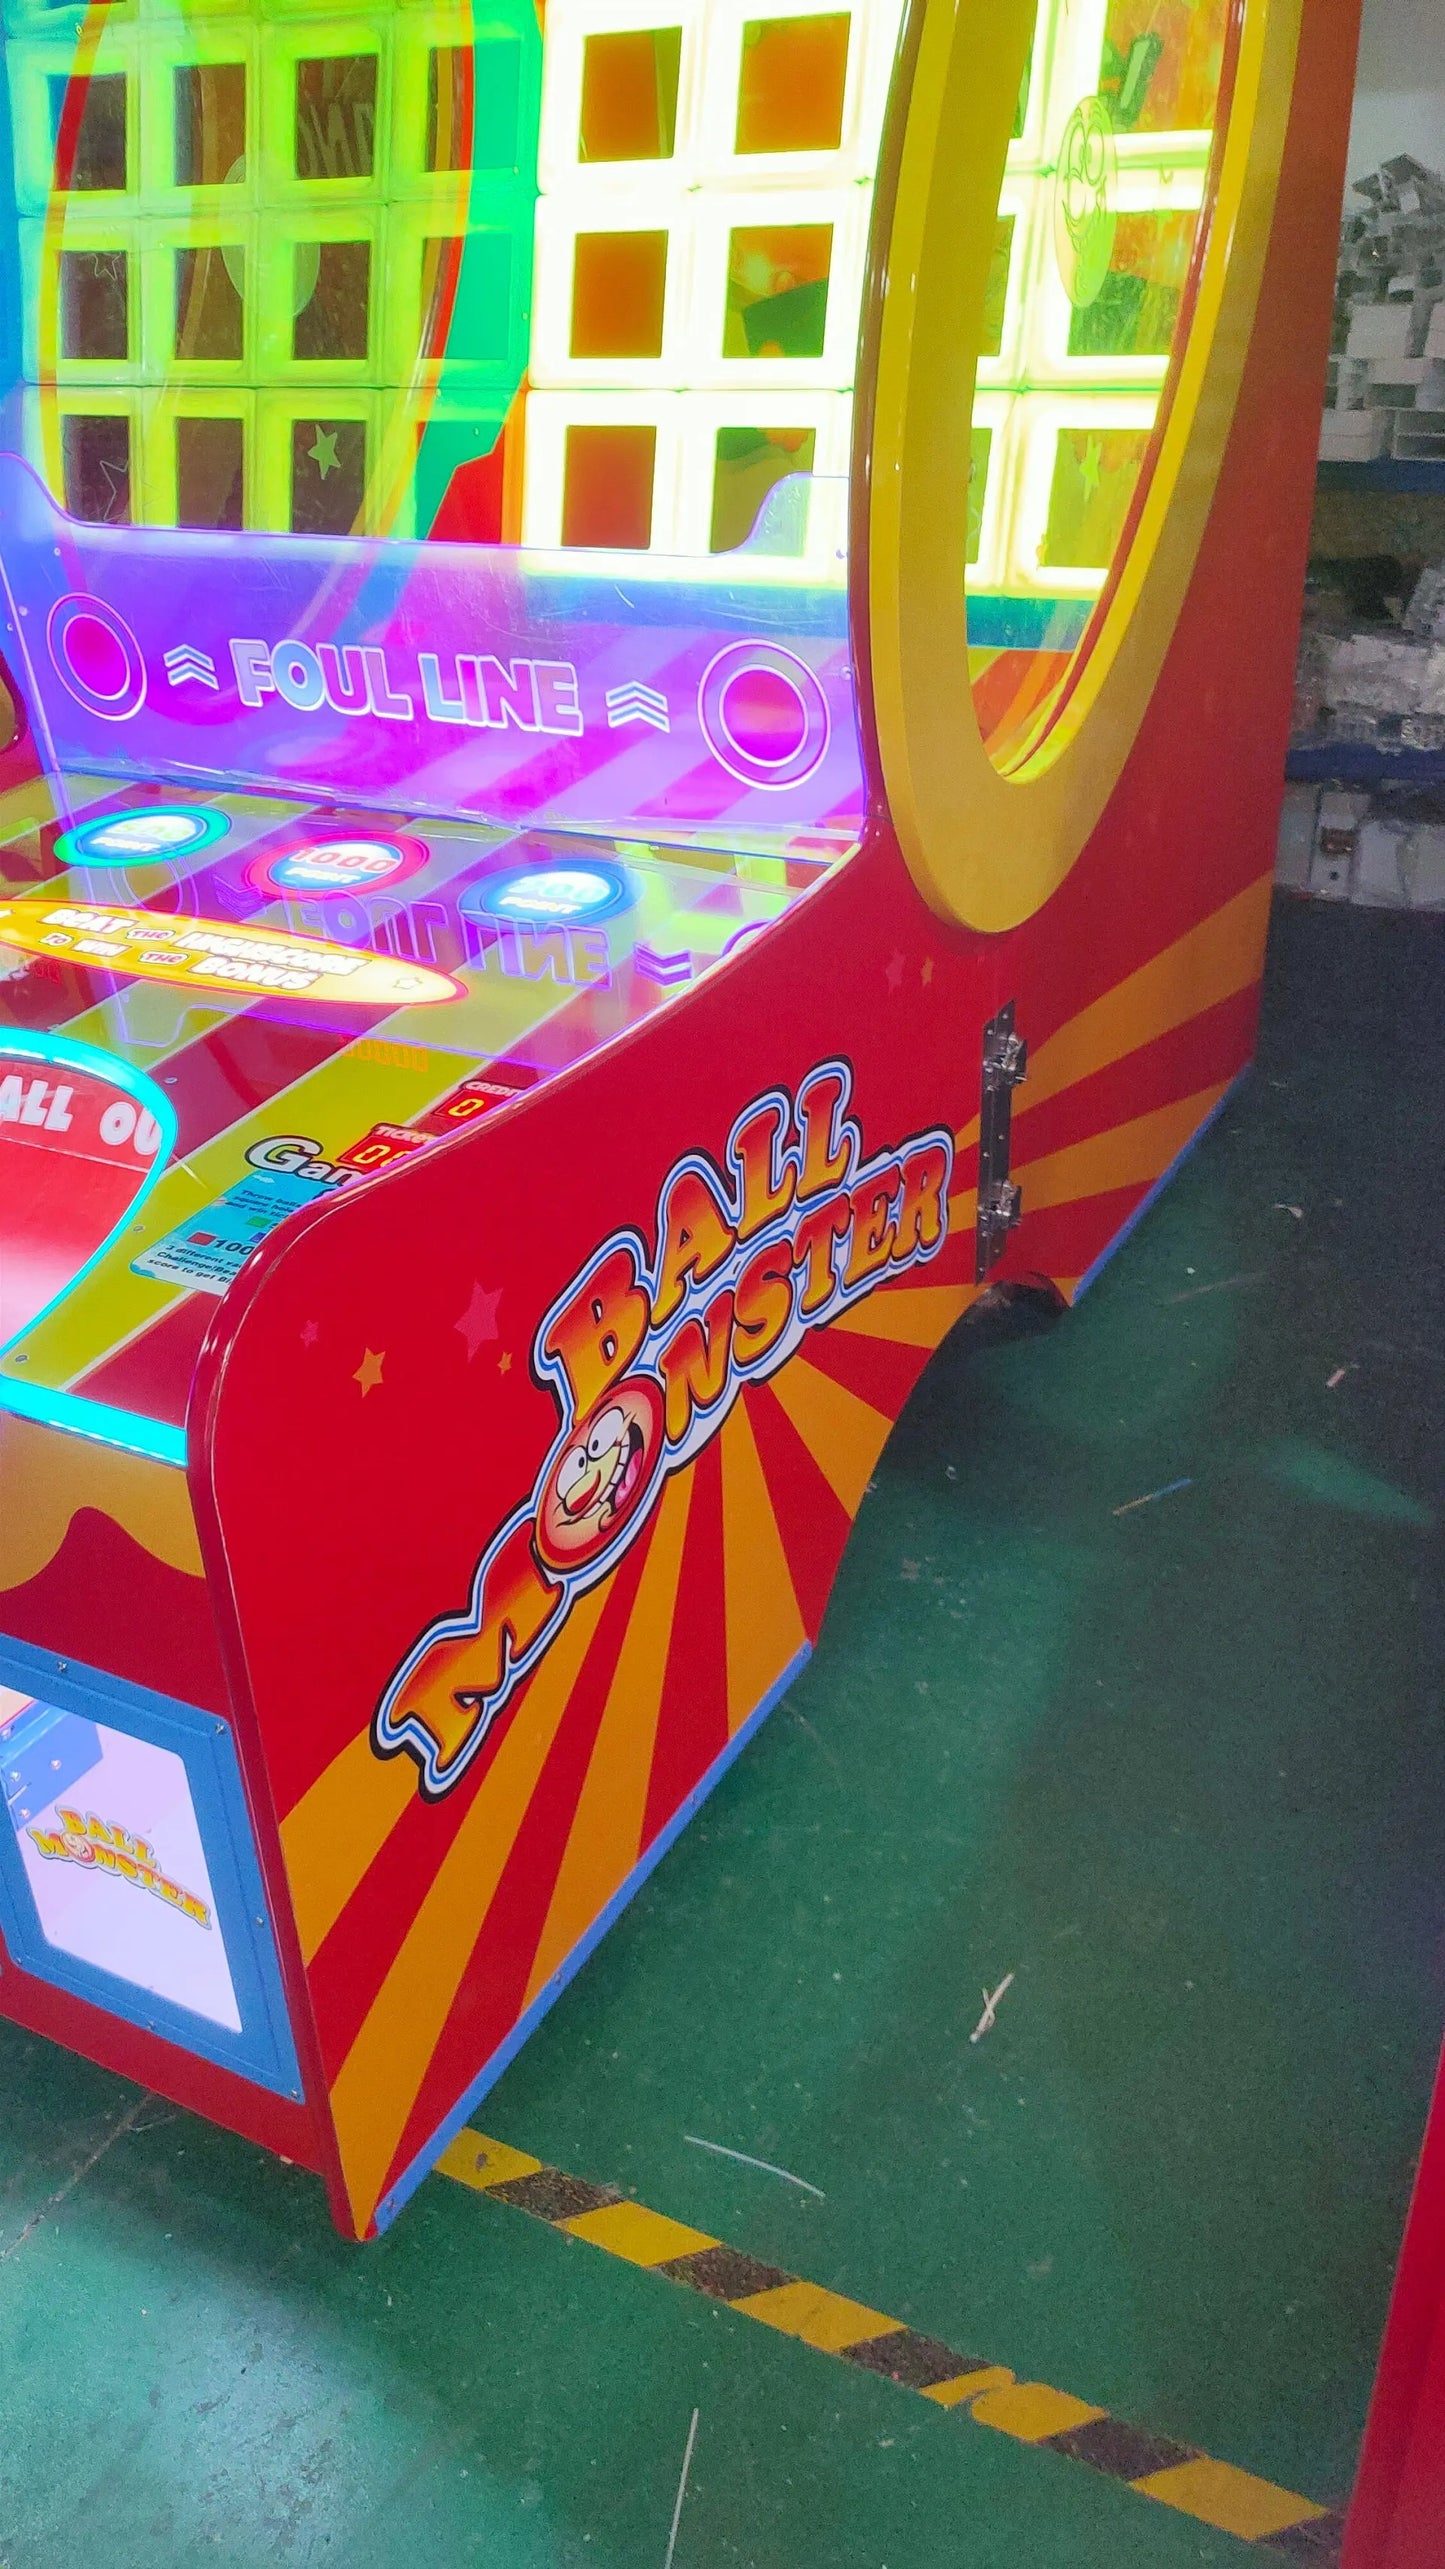 Ball-Monster-Lottery-Redemption-game-machine-China-Direct-Addictive-Sport-Arcade-Games-Tomy-Arcade